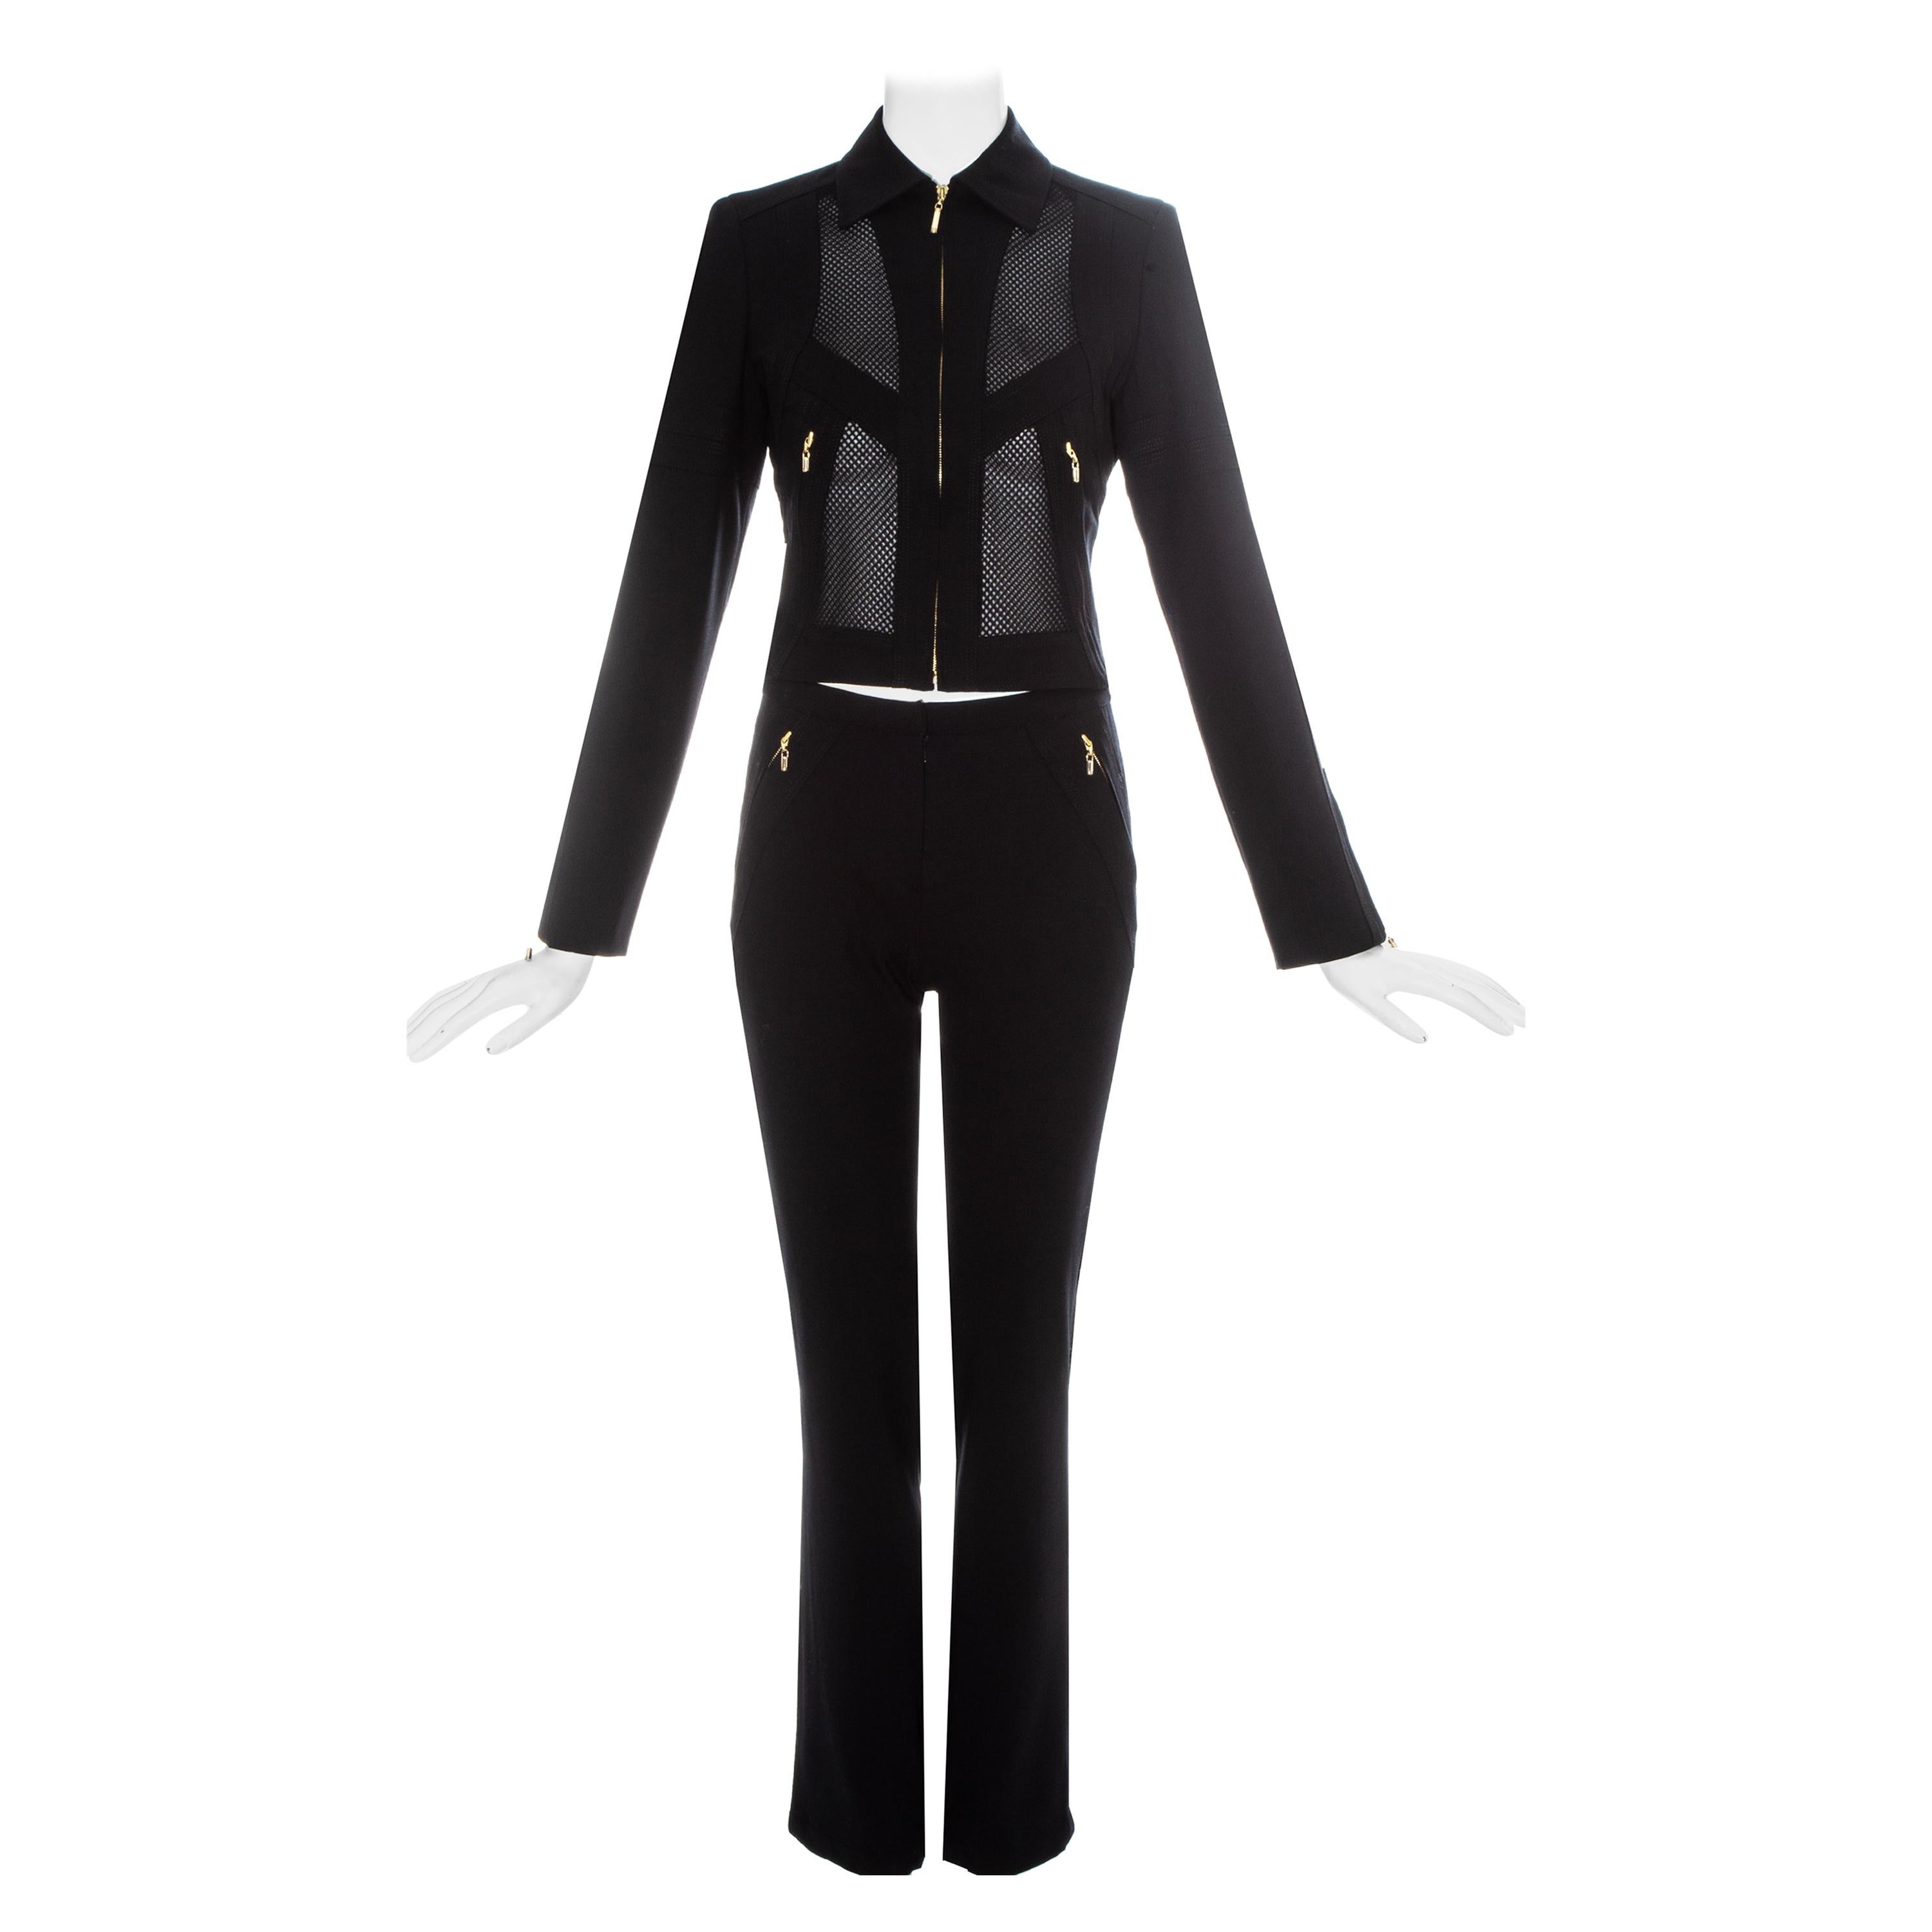 Gianni Versace black lycra and mesh pant suit, ss 2003 For Sale